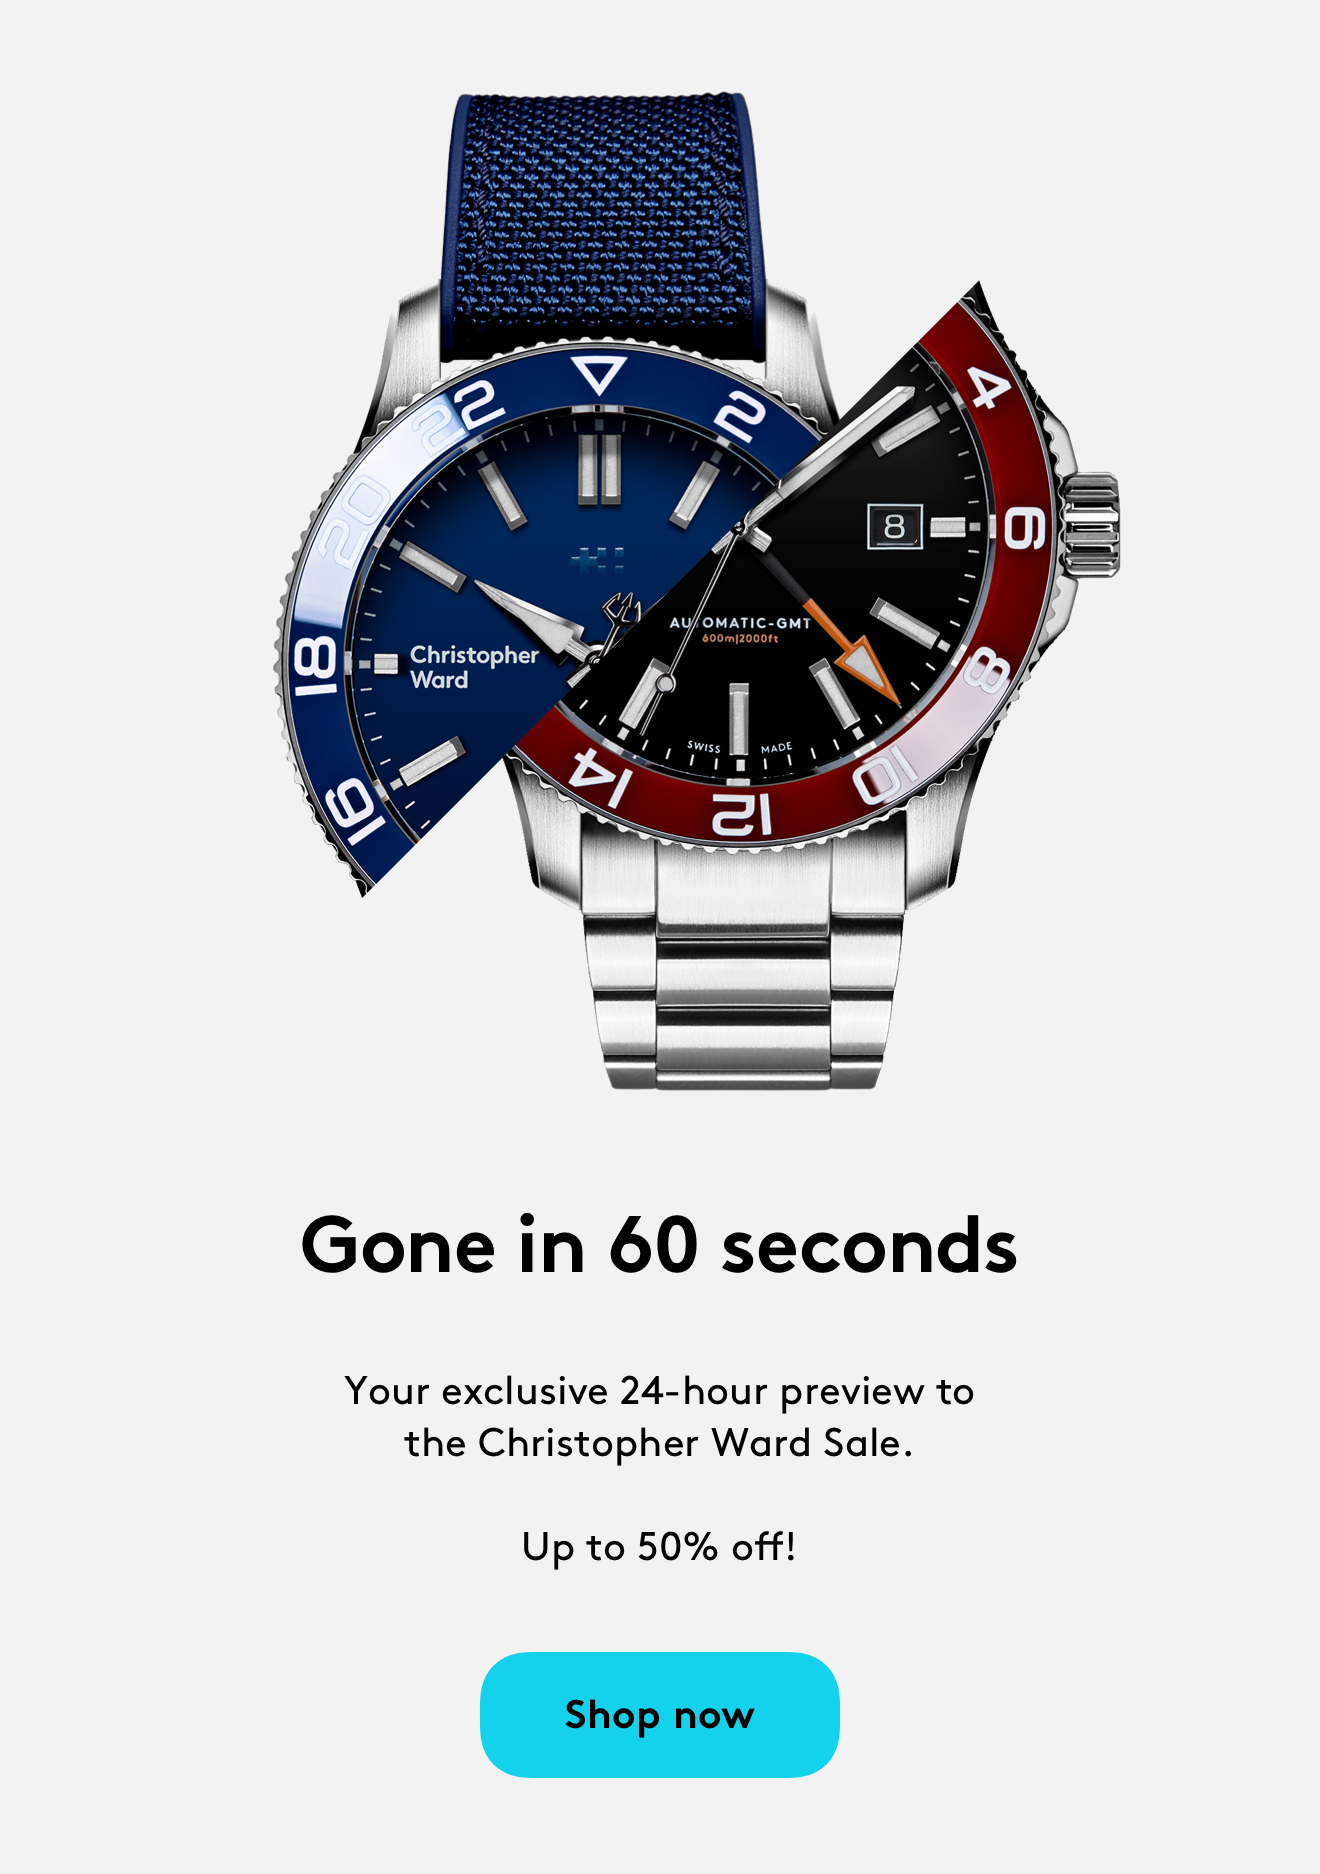 Gone in 60 seconds. Your exclusive 24-hour preview to the Christopher Ward Sale.